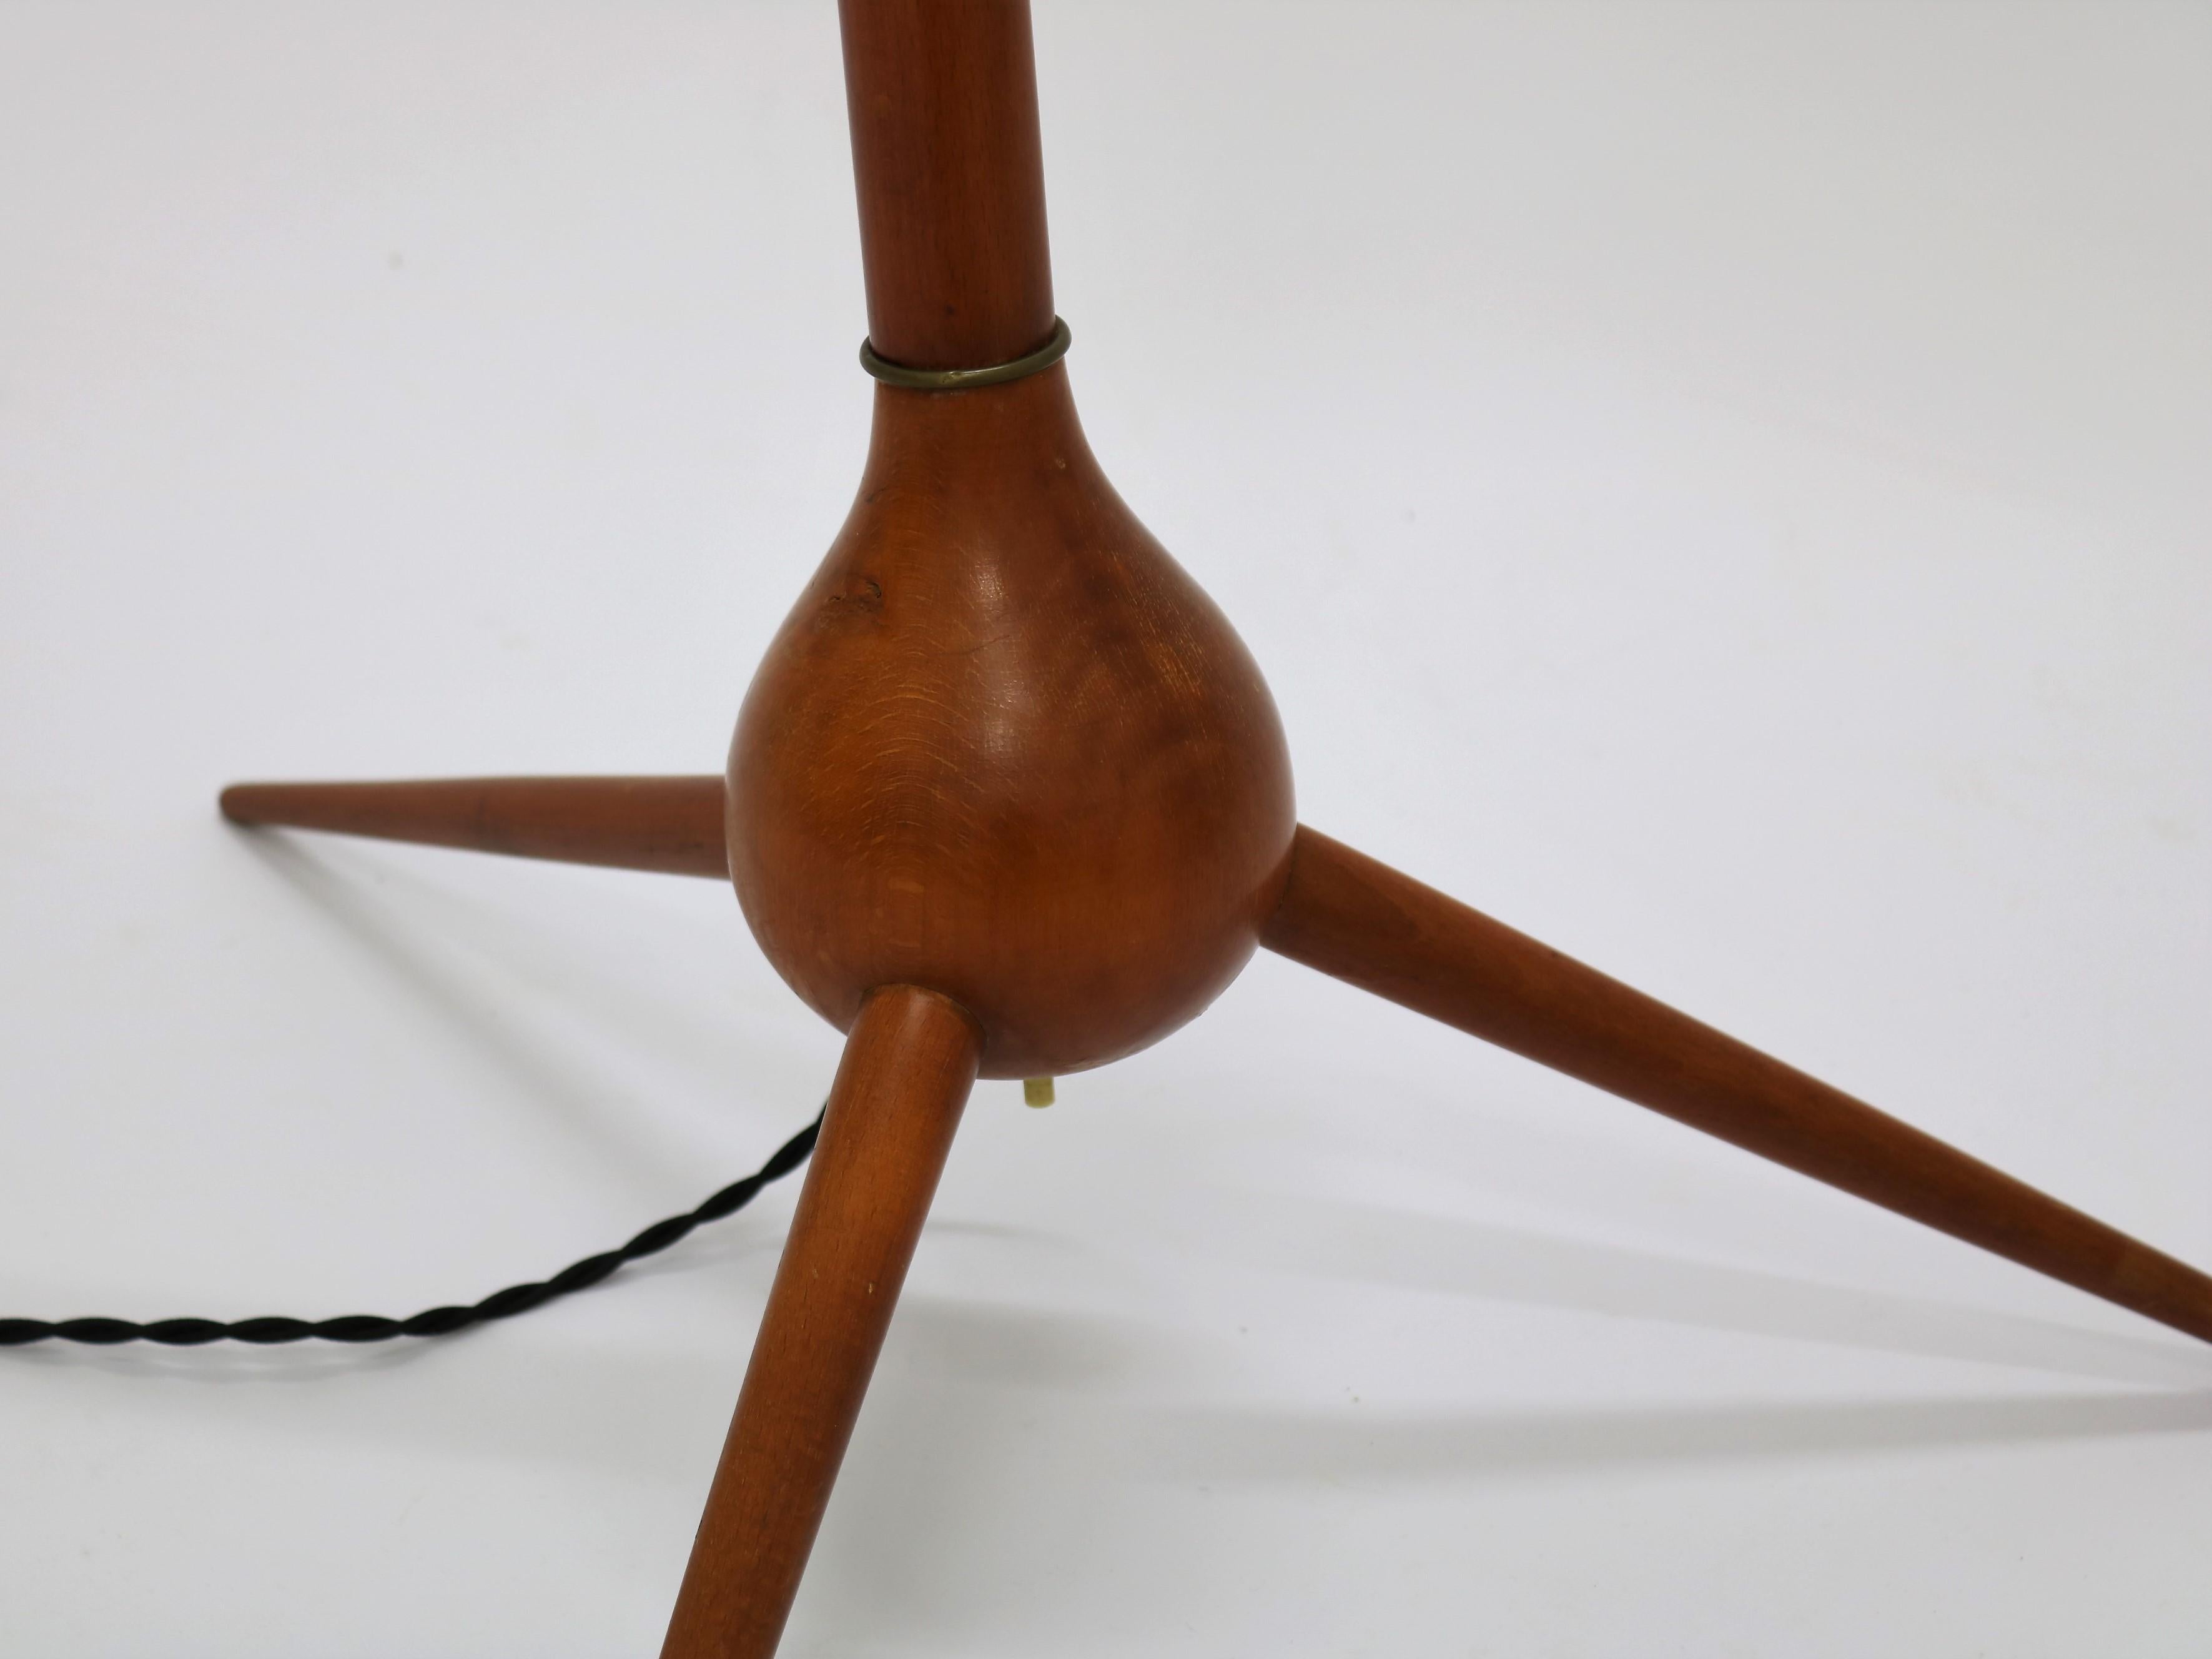 Floor lamp by Danish designer Severin Hansen for Haslev Furniture in the 1950s. The lamp base is made of stained beech with brass elements. The switch is placed between the elegant tripod legs and the lamp can be turned on by the foot. The shade is